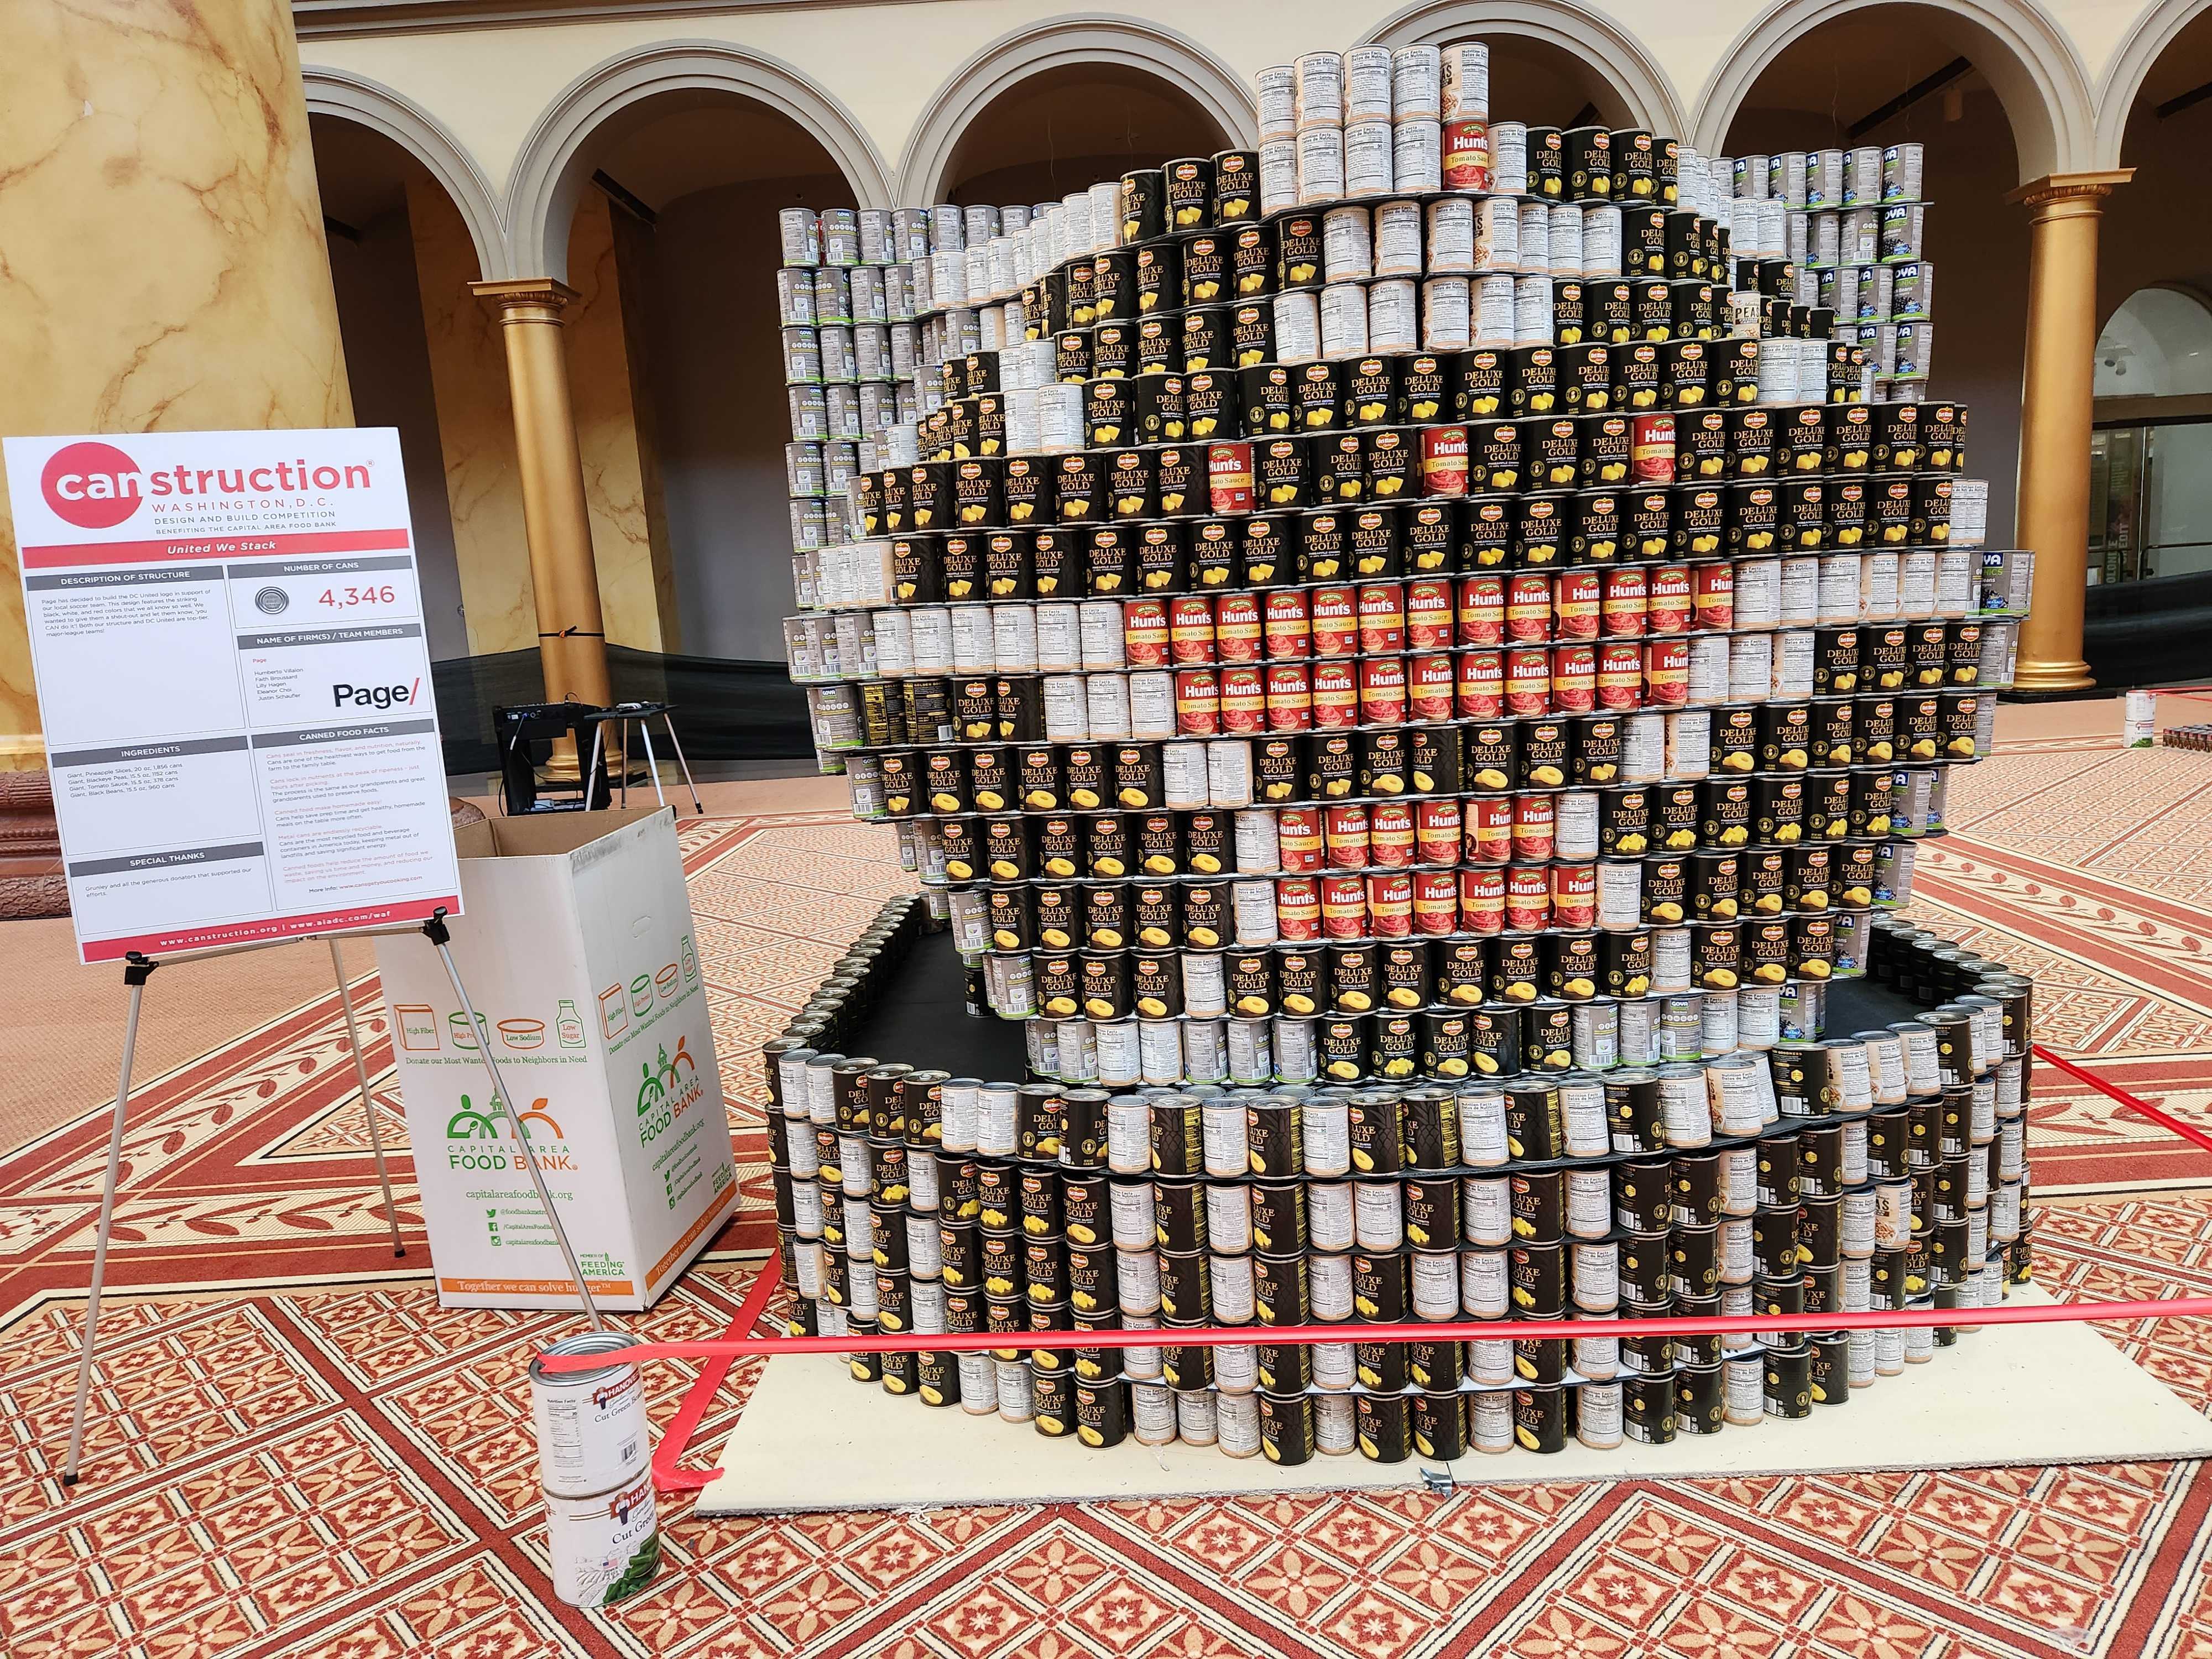 Image of can sculpture in shape of DC United logo